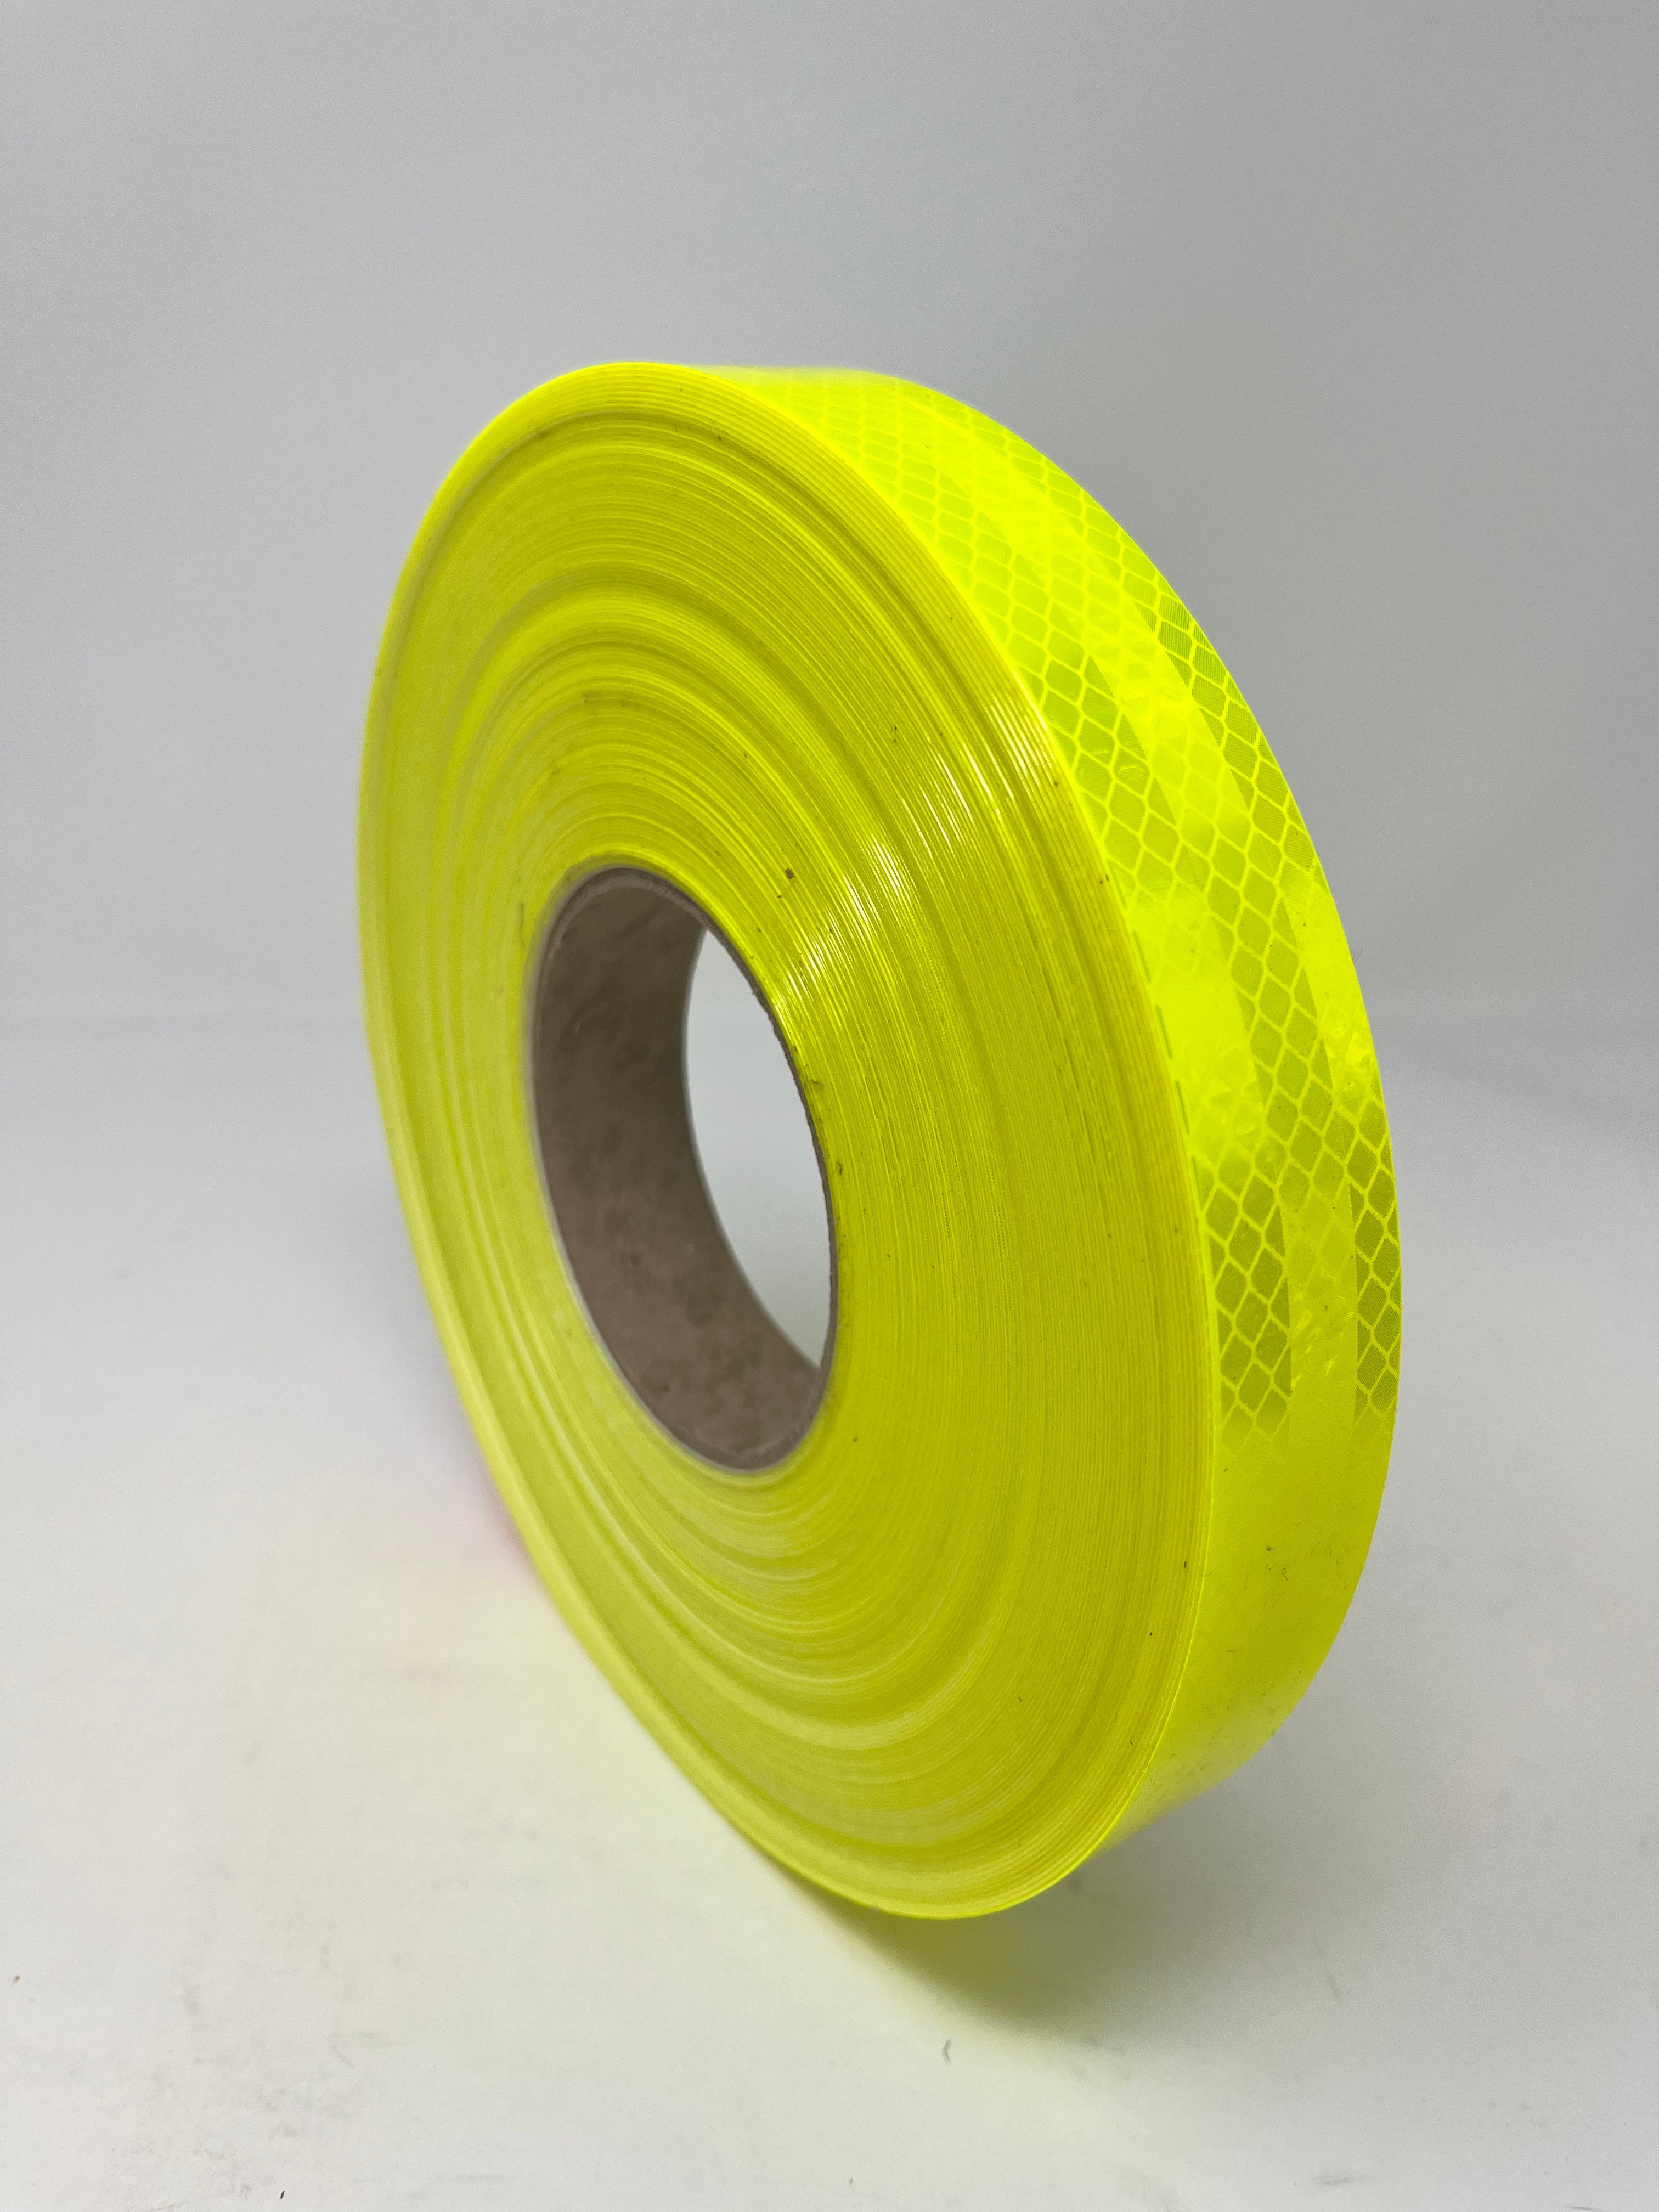 1" x 15' Roll 3M Reflective Tape - Fluorescent Yellow, Green - Converted from Master Roll